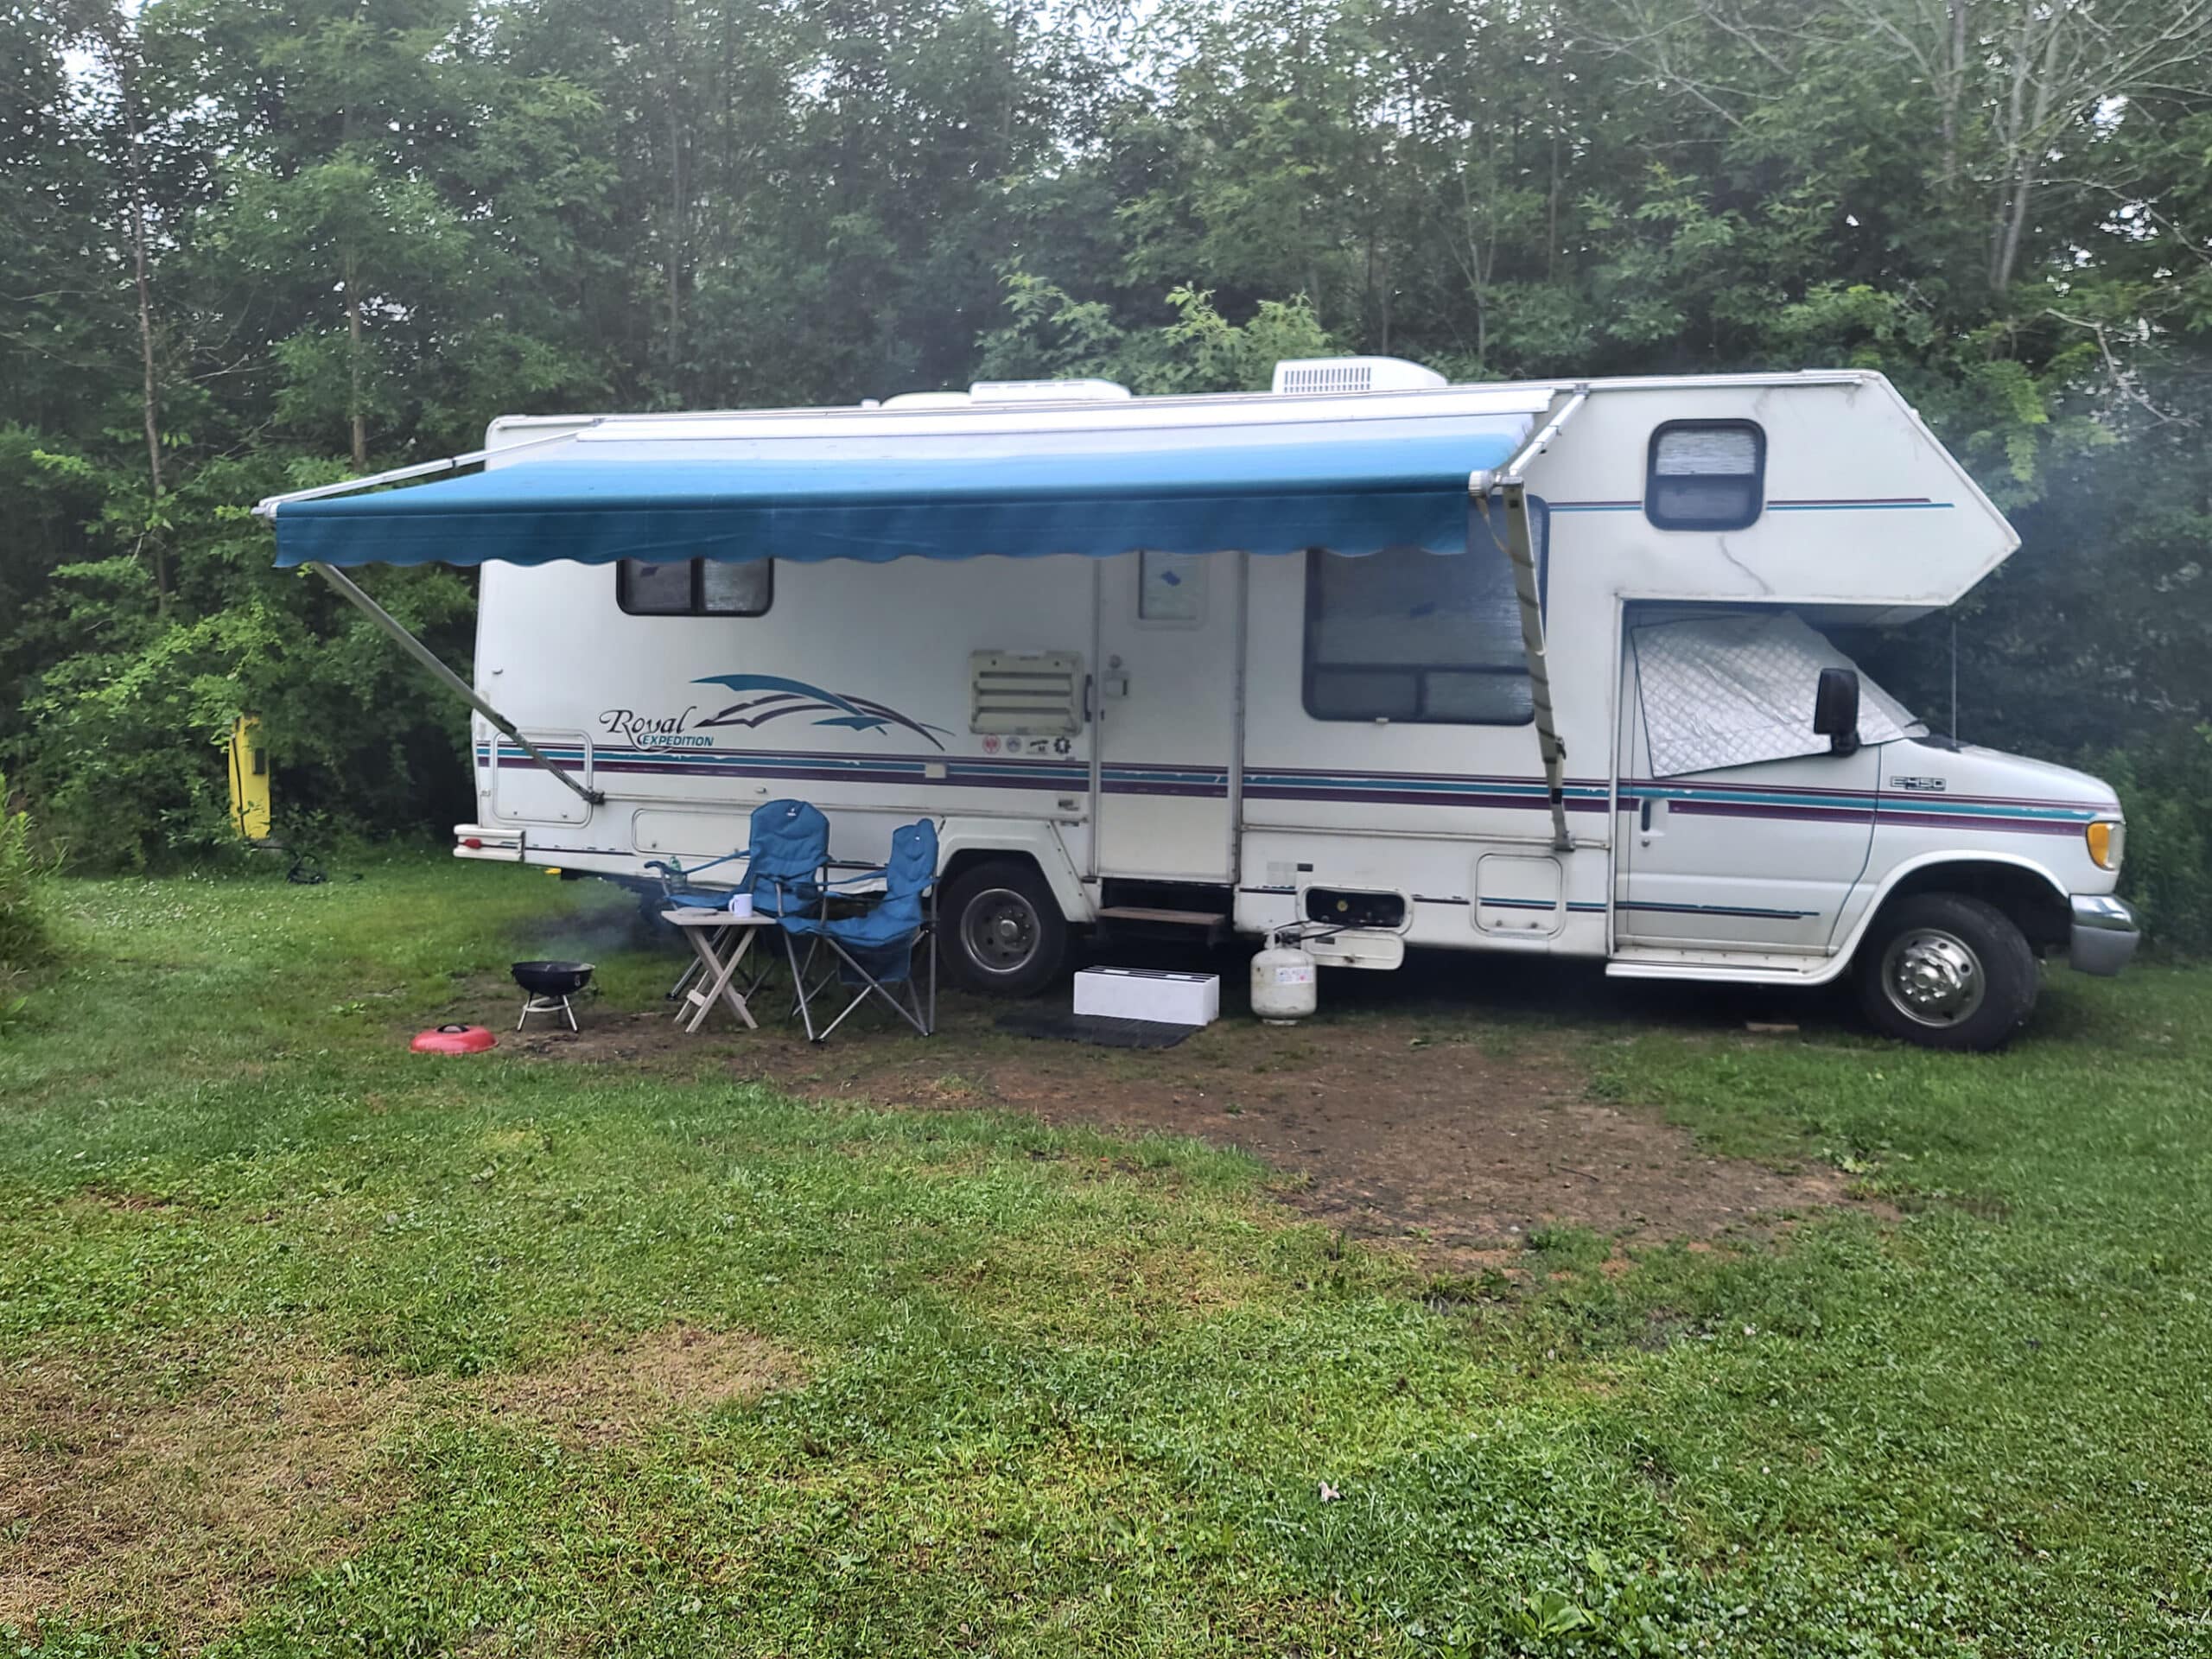 A side view of a motorhome setup at a camp site with awning out, two chairs, and a small grill.